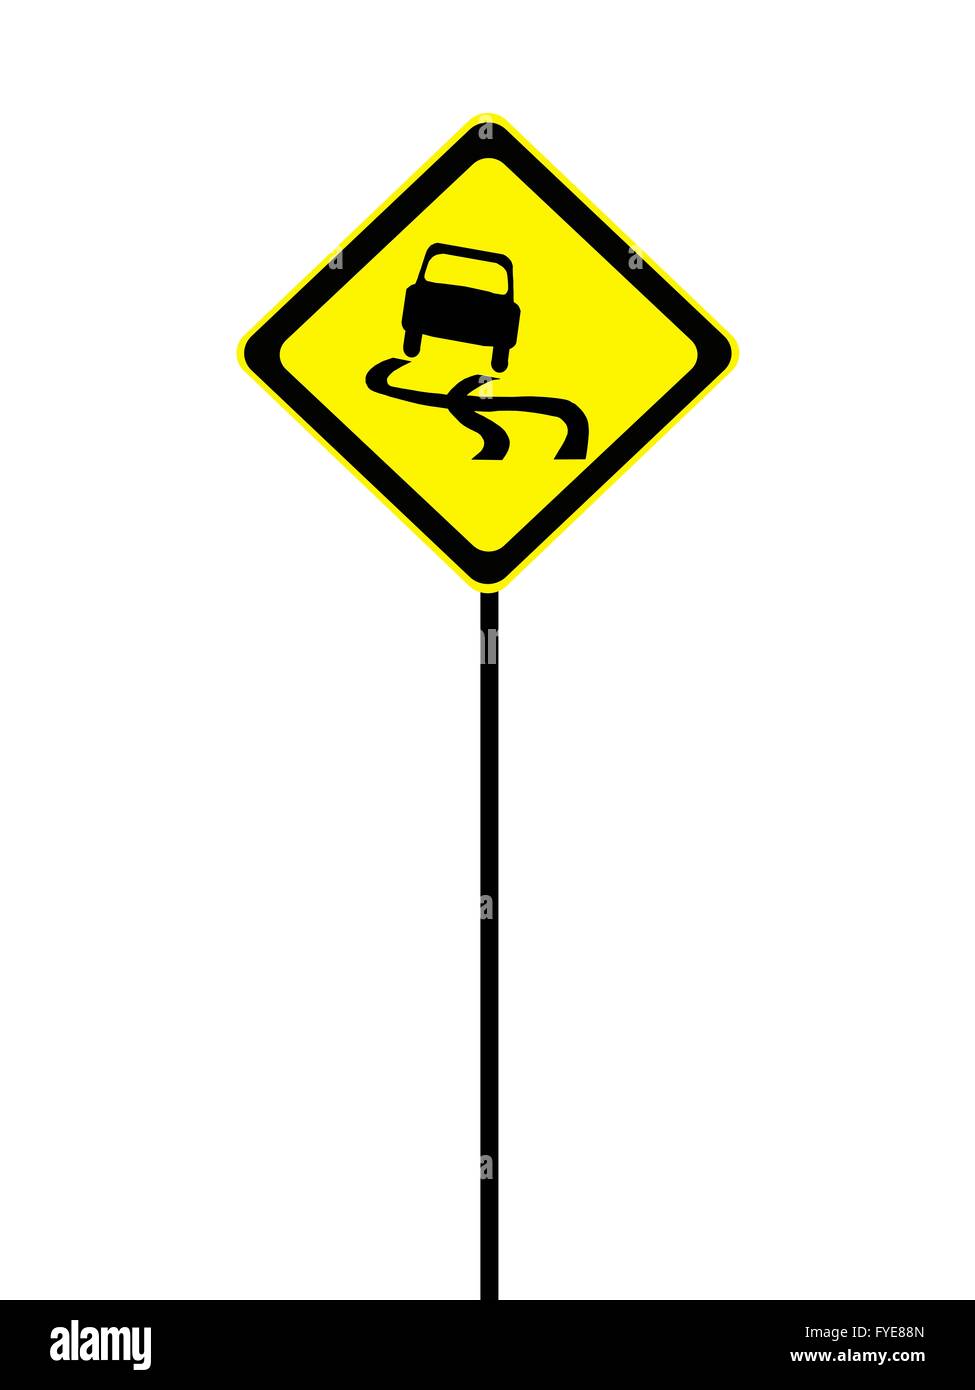 A road sign isolated against a white background Stock Photo